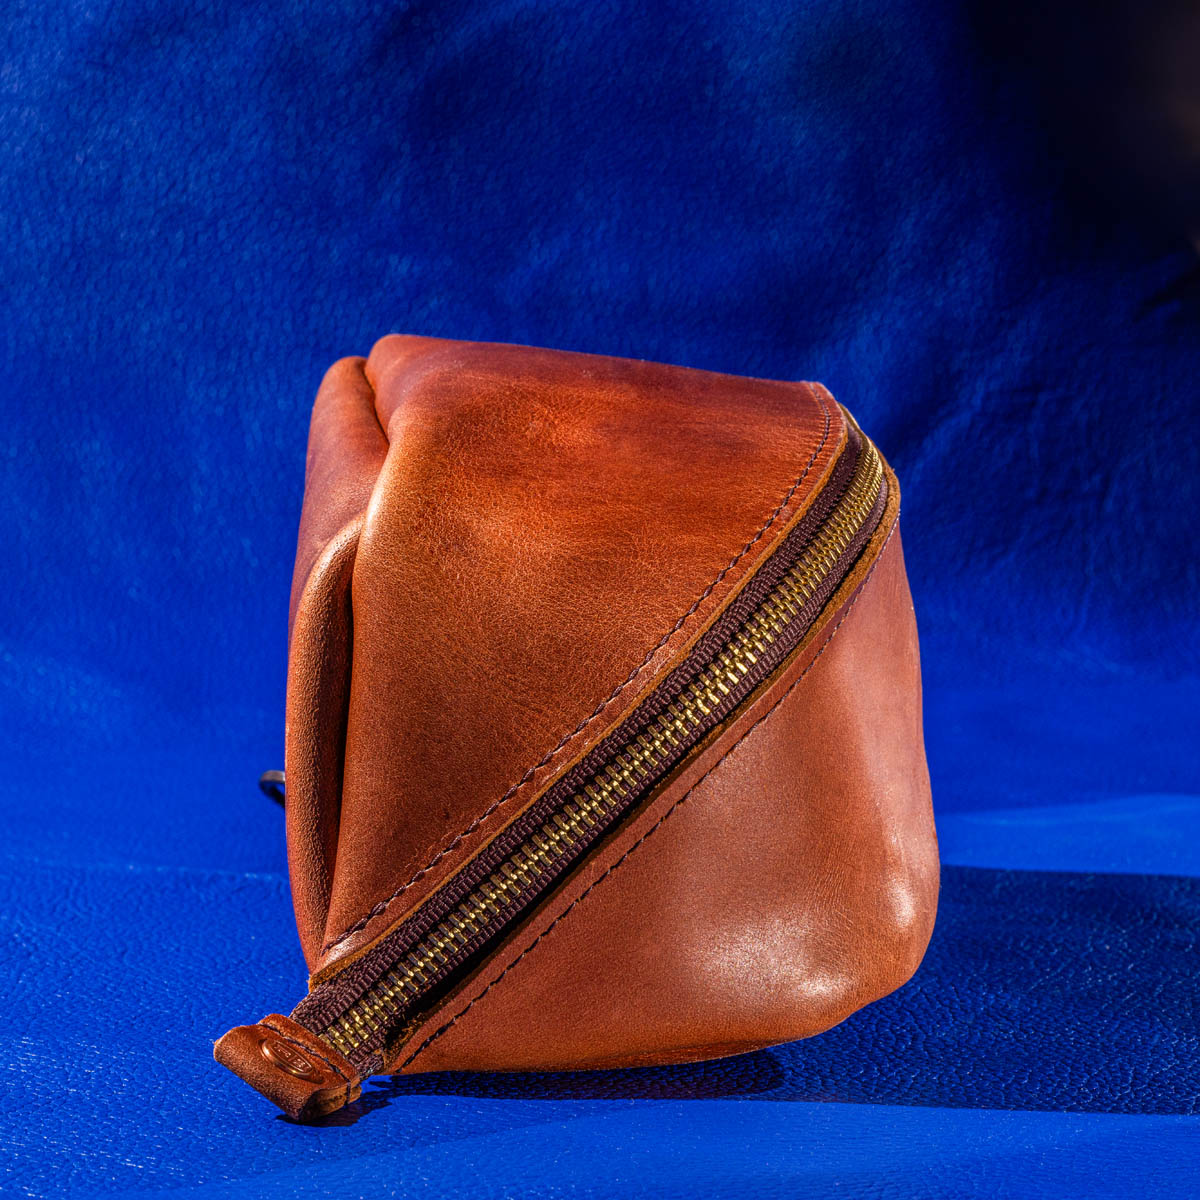 leather cosmetic pouch